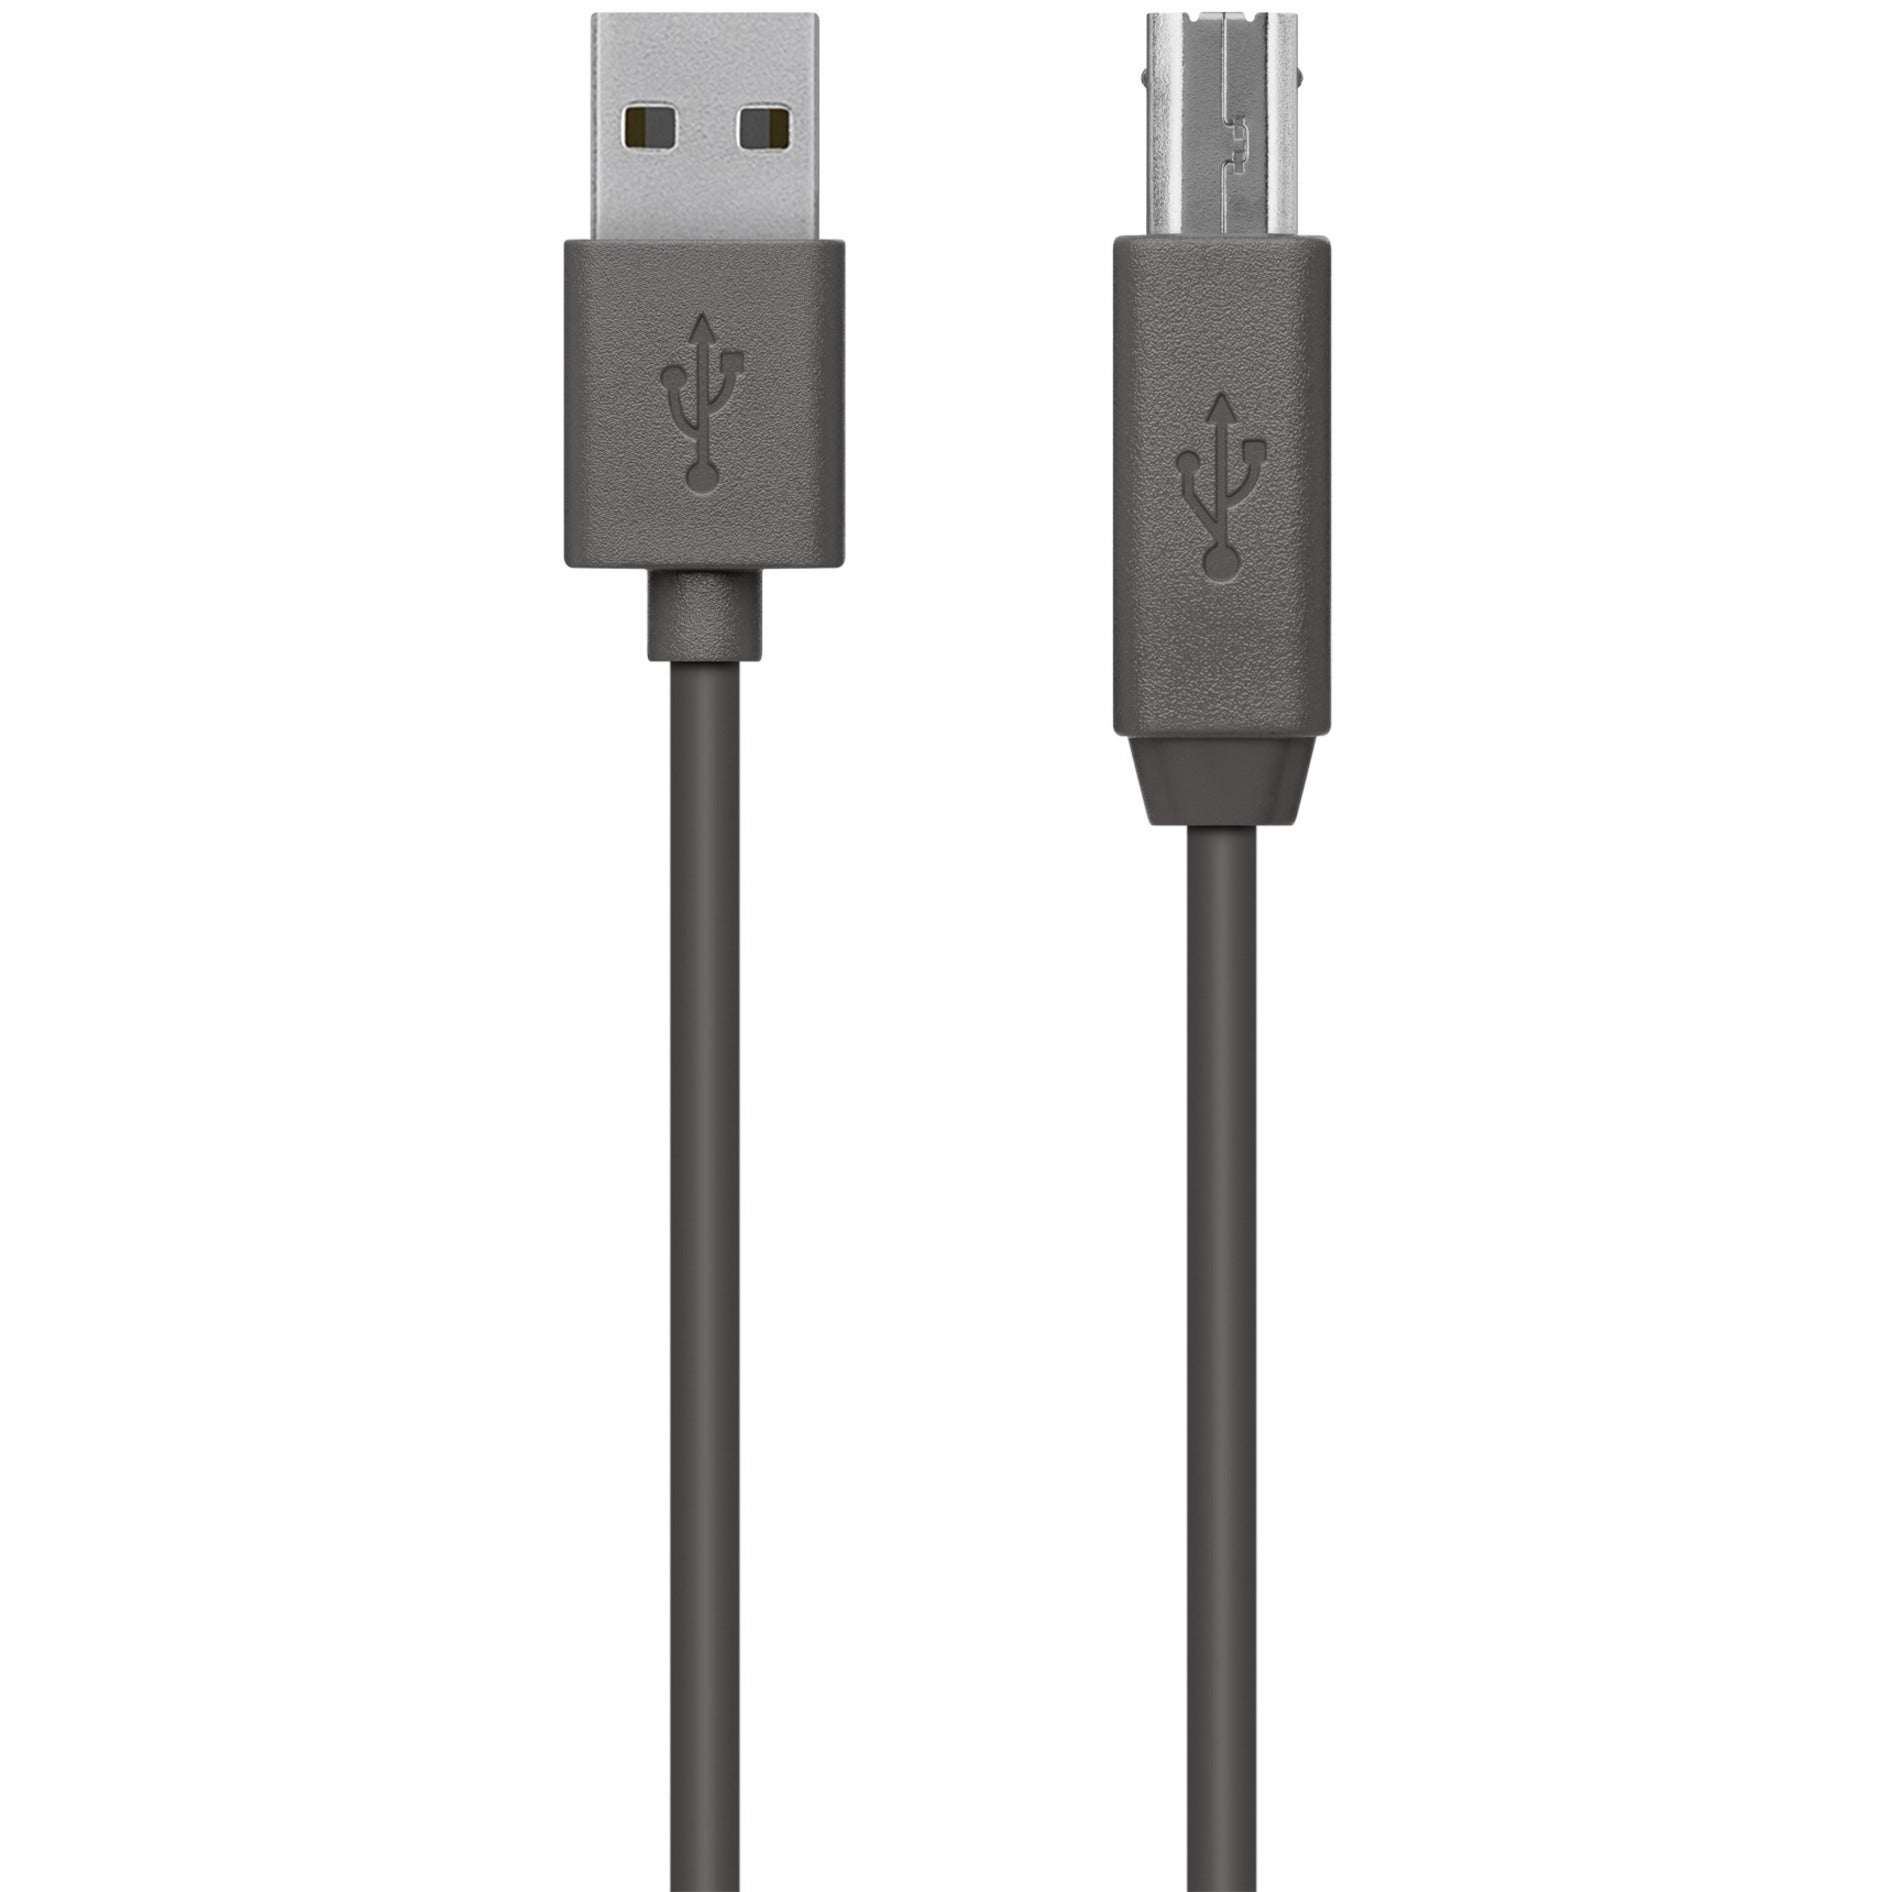 Belkin F3U154BT4.8M USB2.0 A - B Cable 4.8m, 15.75 ft Data Transfer Cable